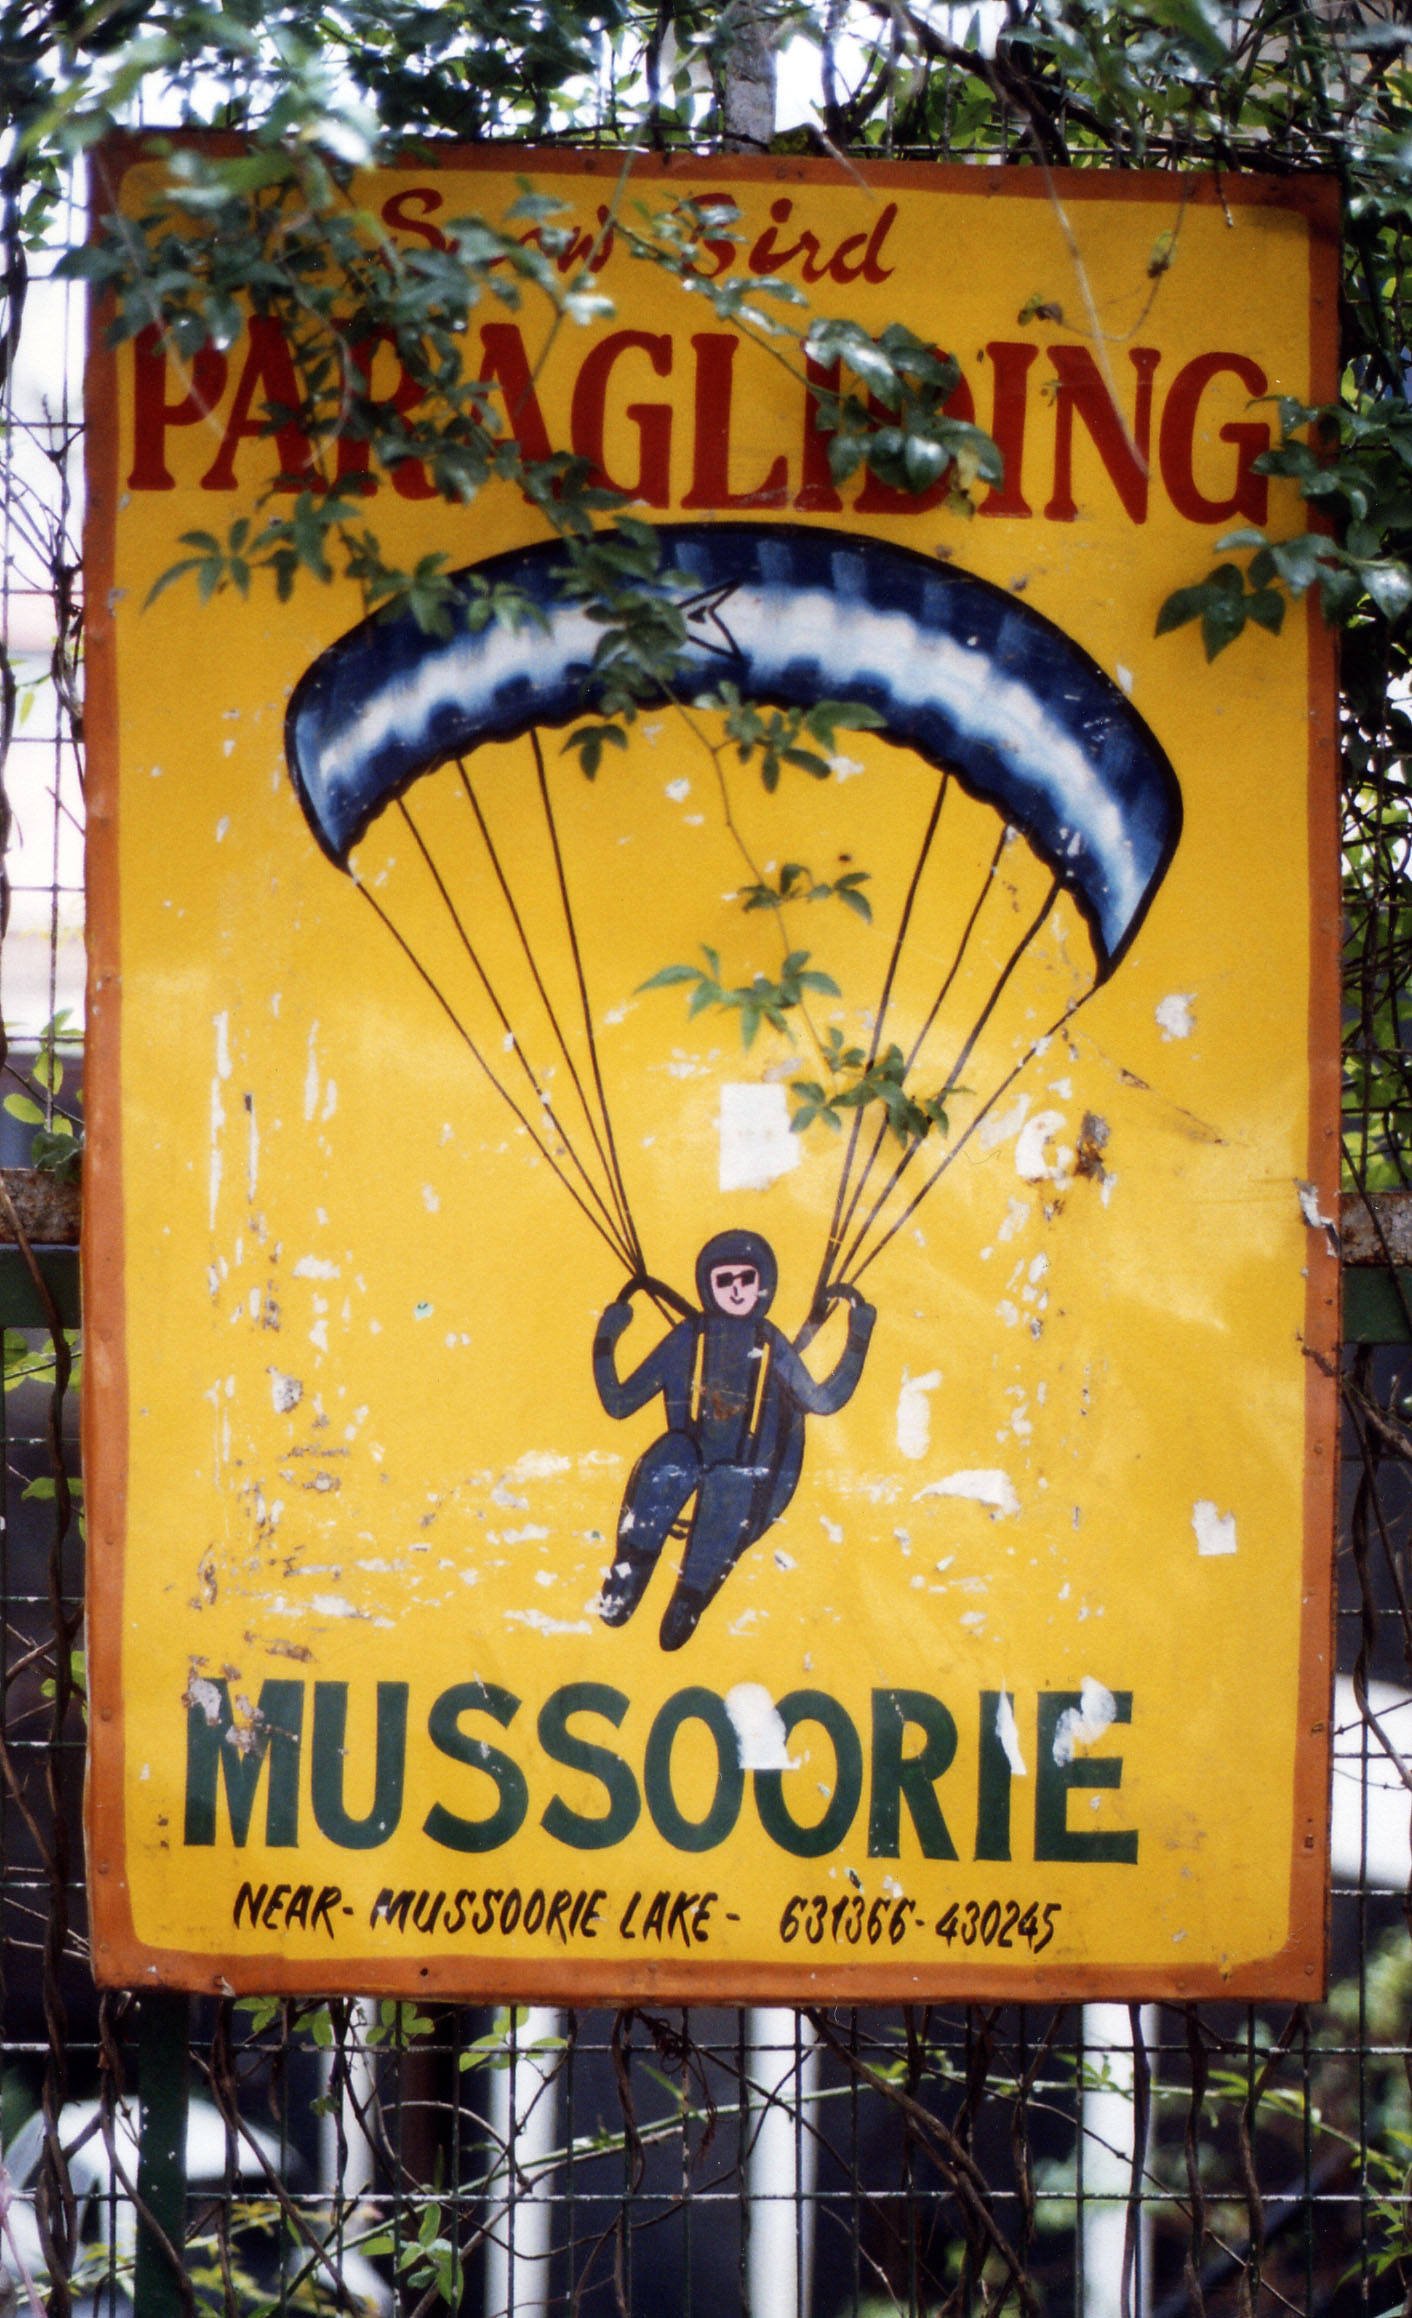 Paragliding (Mussourie)